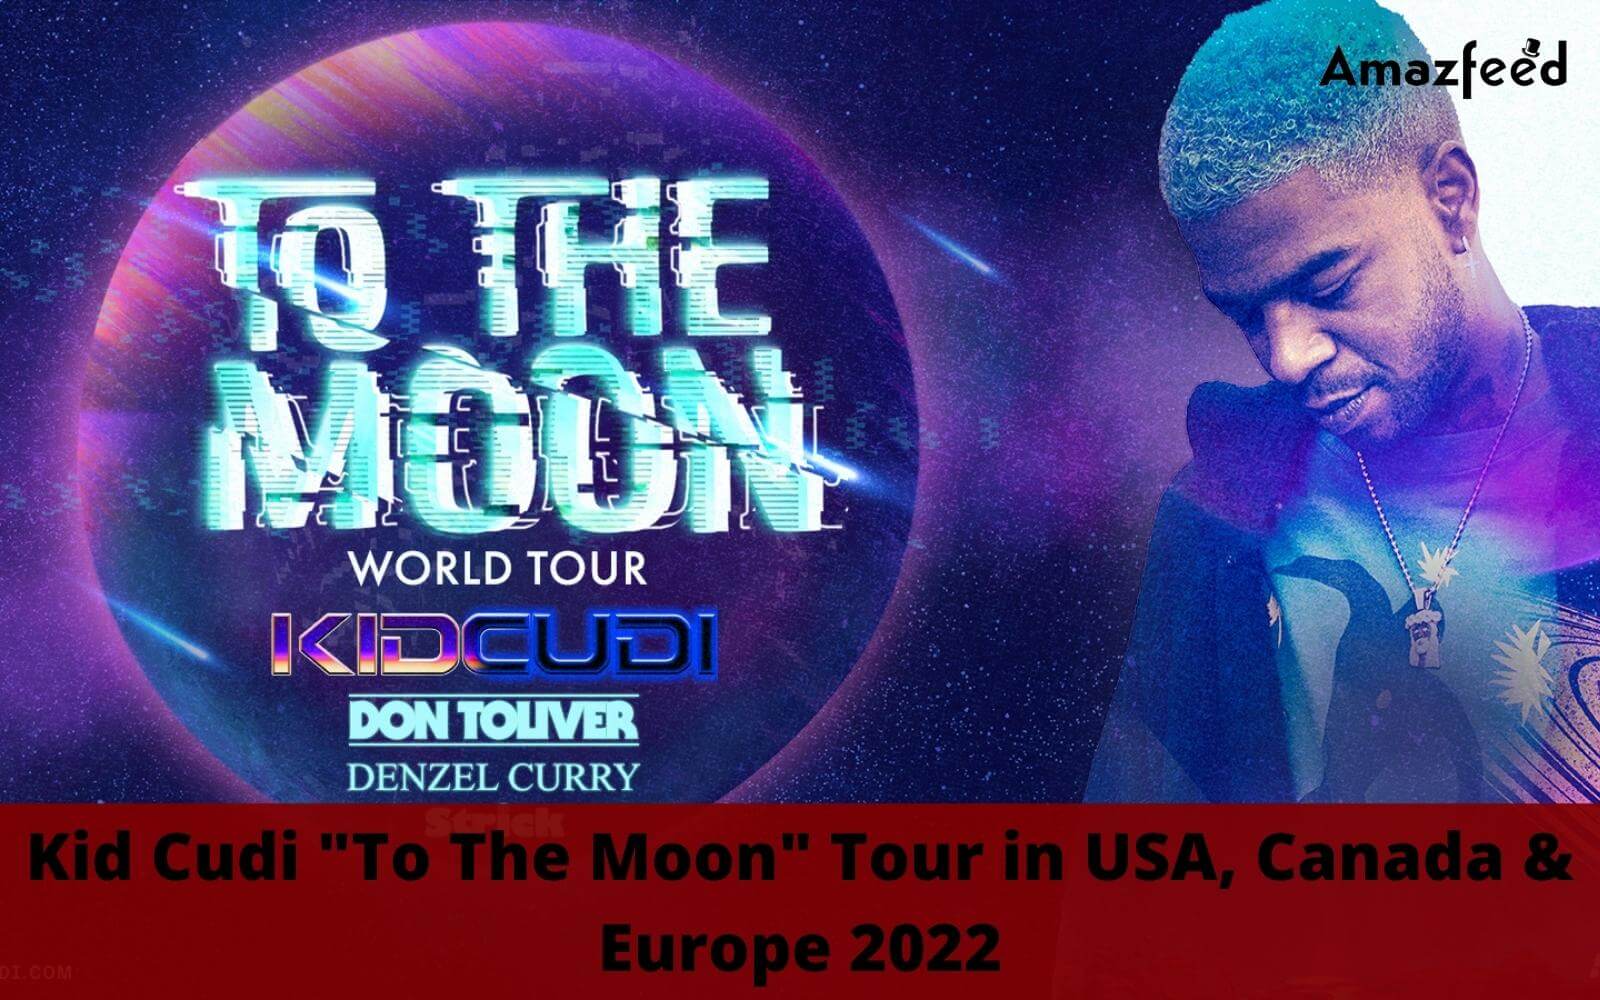 Kid Cudi Setlist 2022, "To The Moon" Tour Dates in 2022 | USA, Canada & Europe | Set List, Band Members